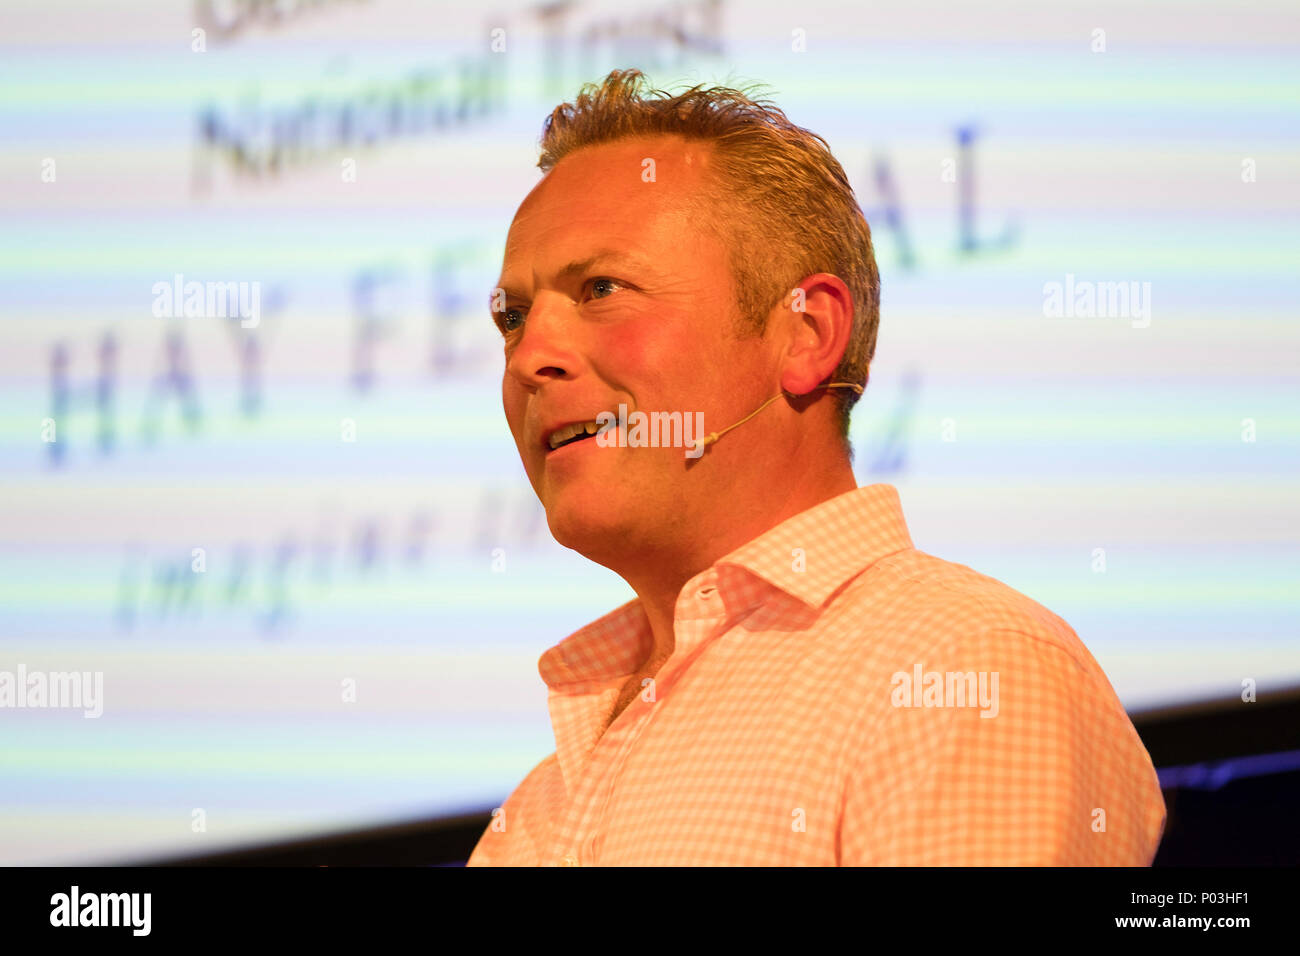 JULES HUDSON, archaeologist, historian,  BBC television presenter (Escape to the Country, Countryfile) , speaking about his passion for walled gardens at the Hay Festival  of Literature and the Arts, May 2018 Stock Photo